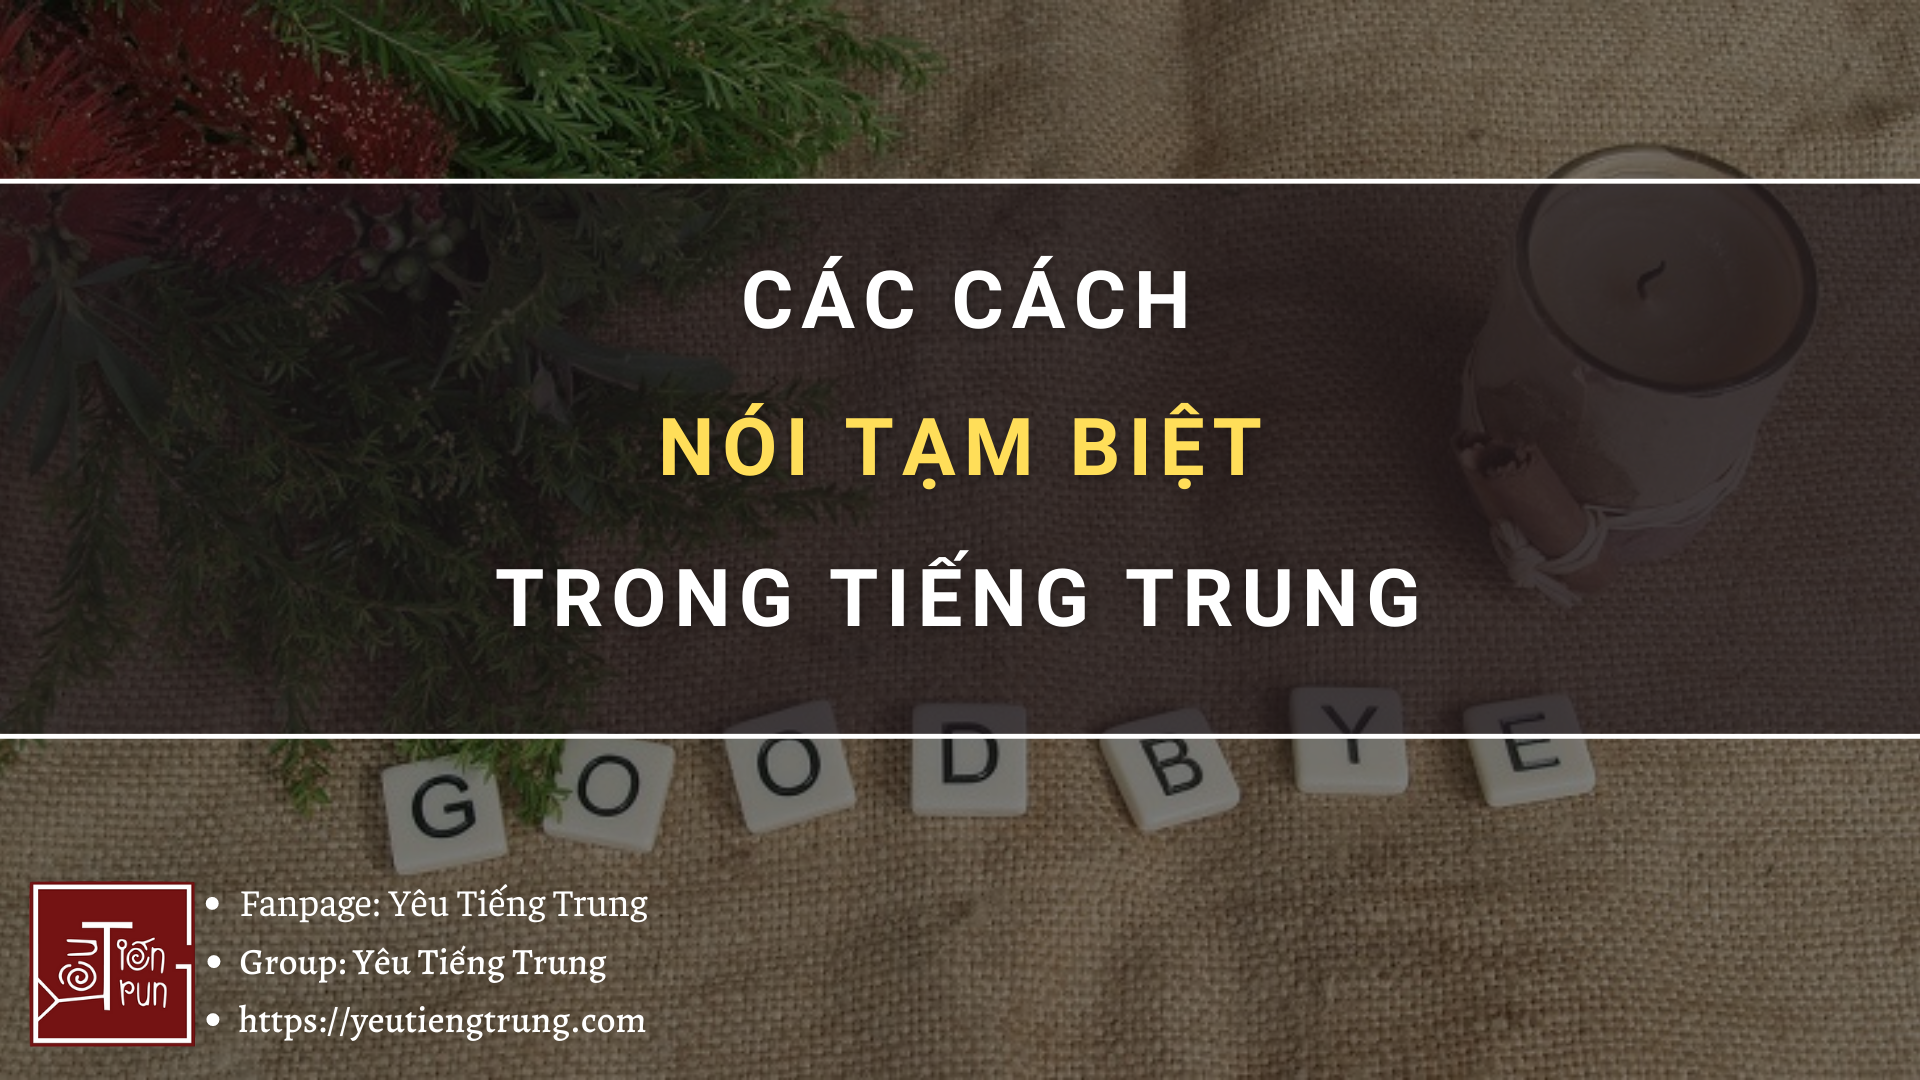 cac-cach-noi-tam-biet-trong-tieng-trung